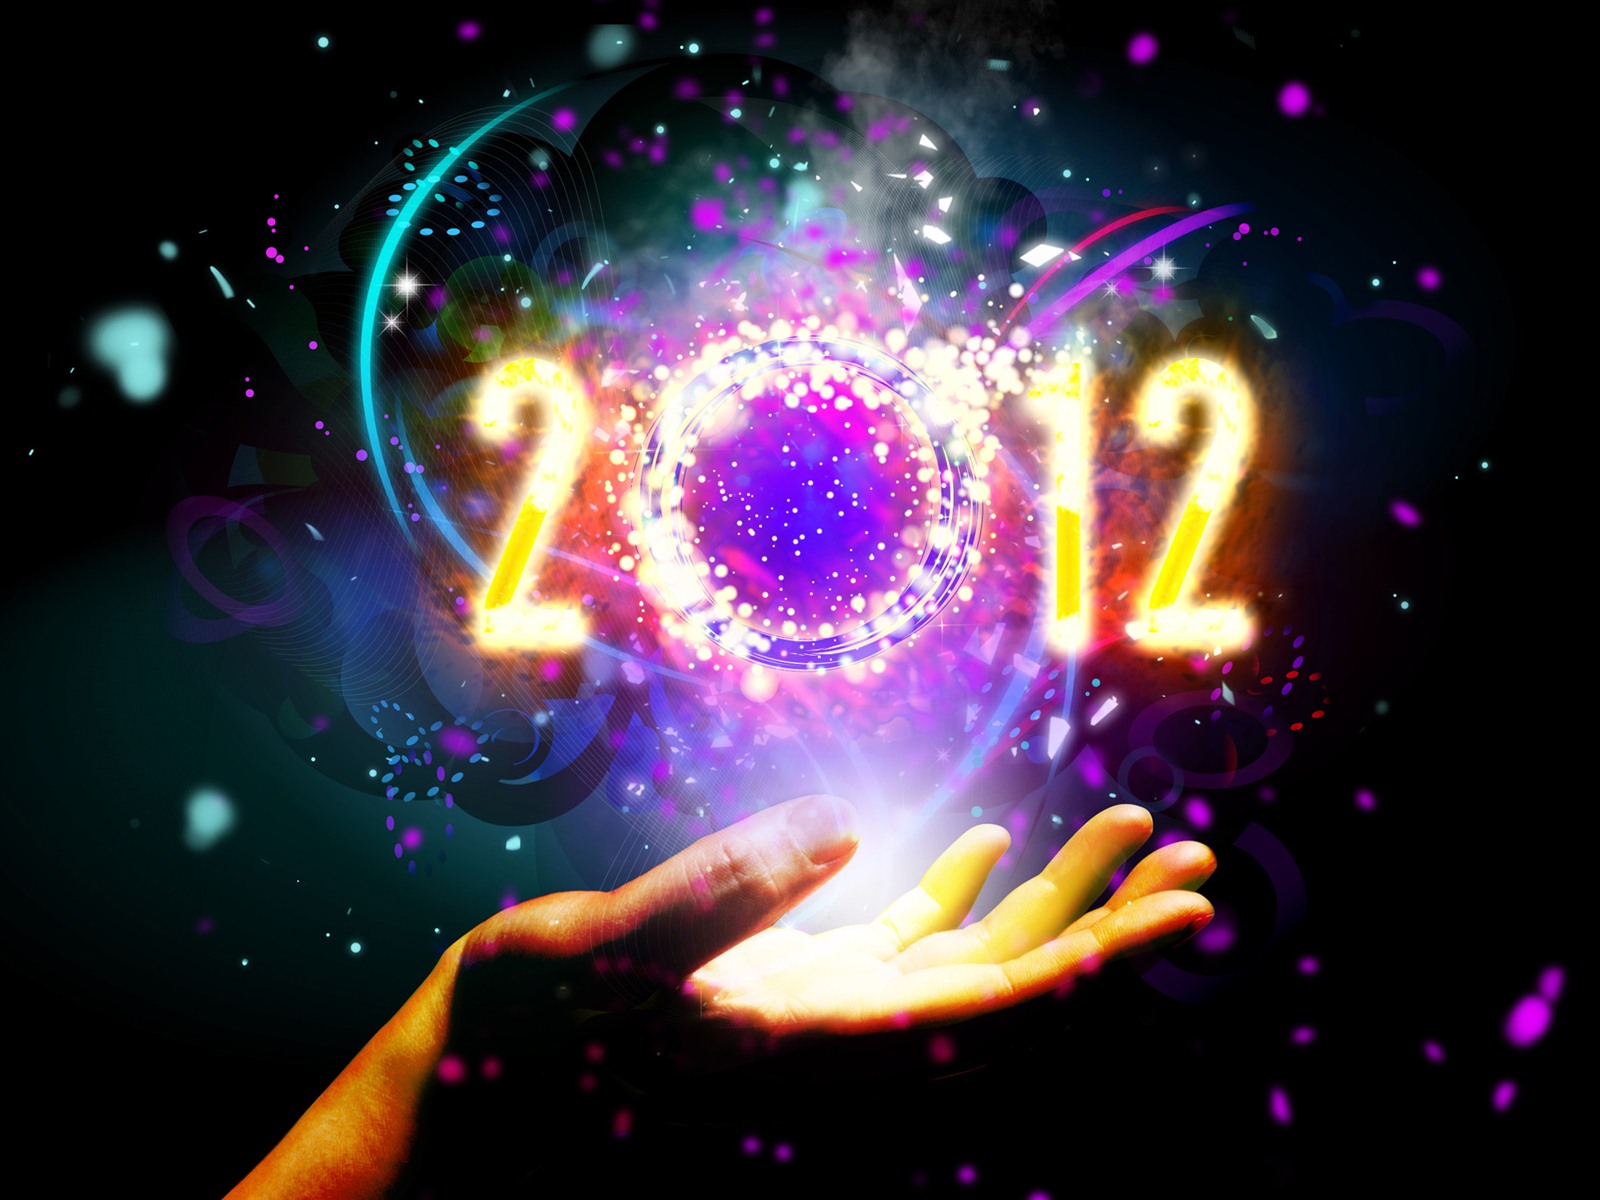 2012 New Year wallpapers (2) #12 - 1600x1200